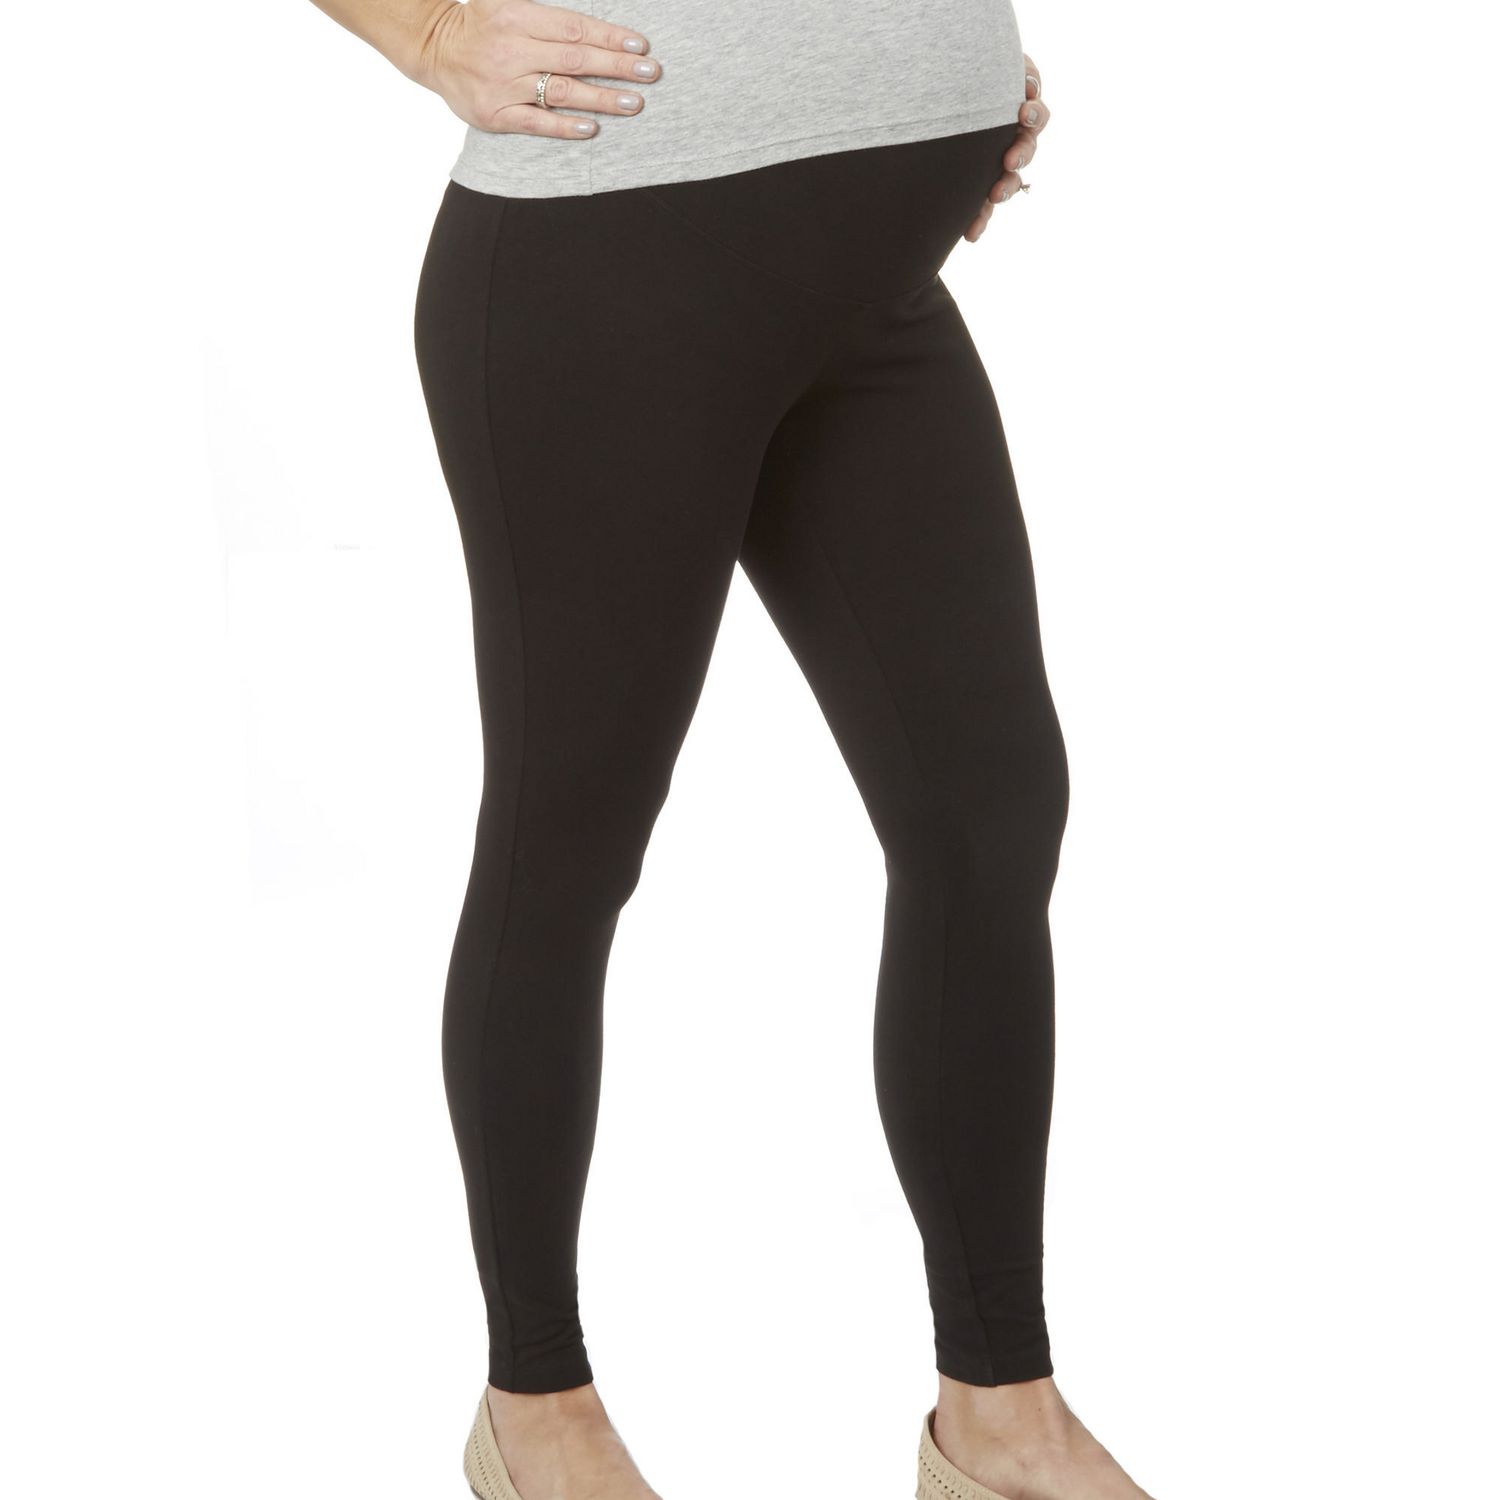 Reebok Women's High-Waisted Active Leggings with Pockets, Dotty